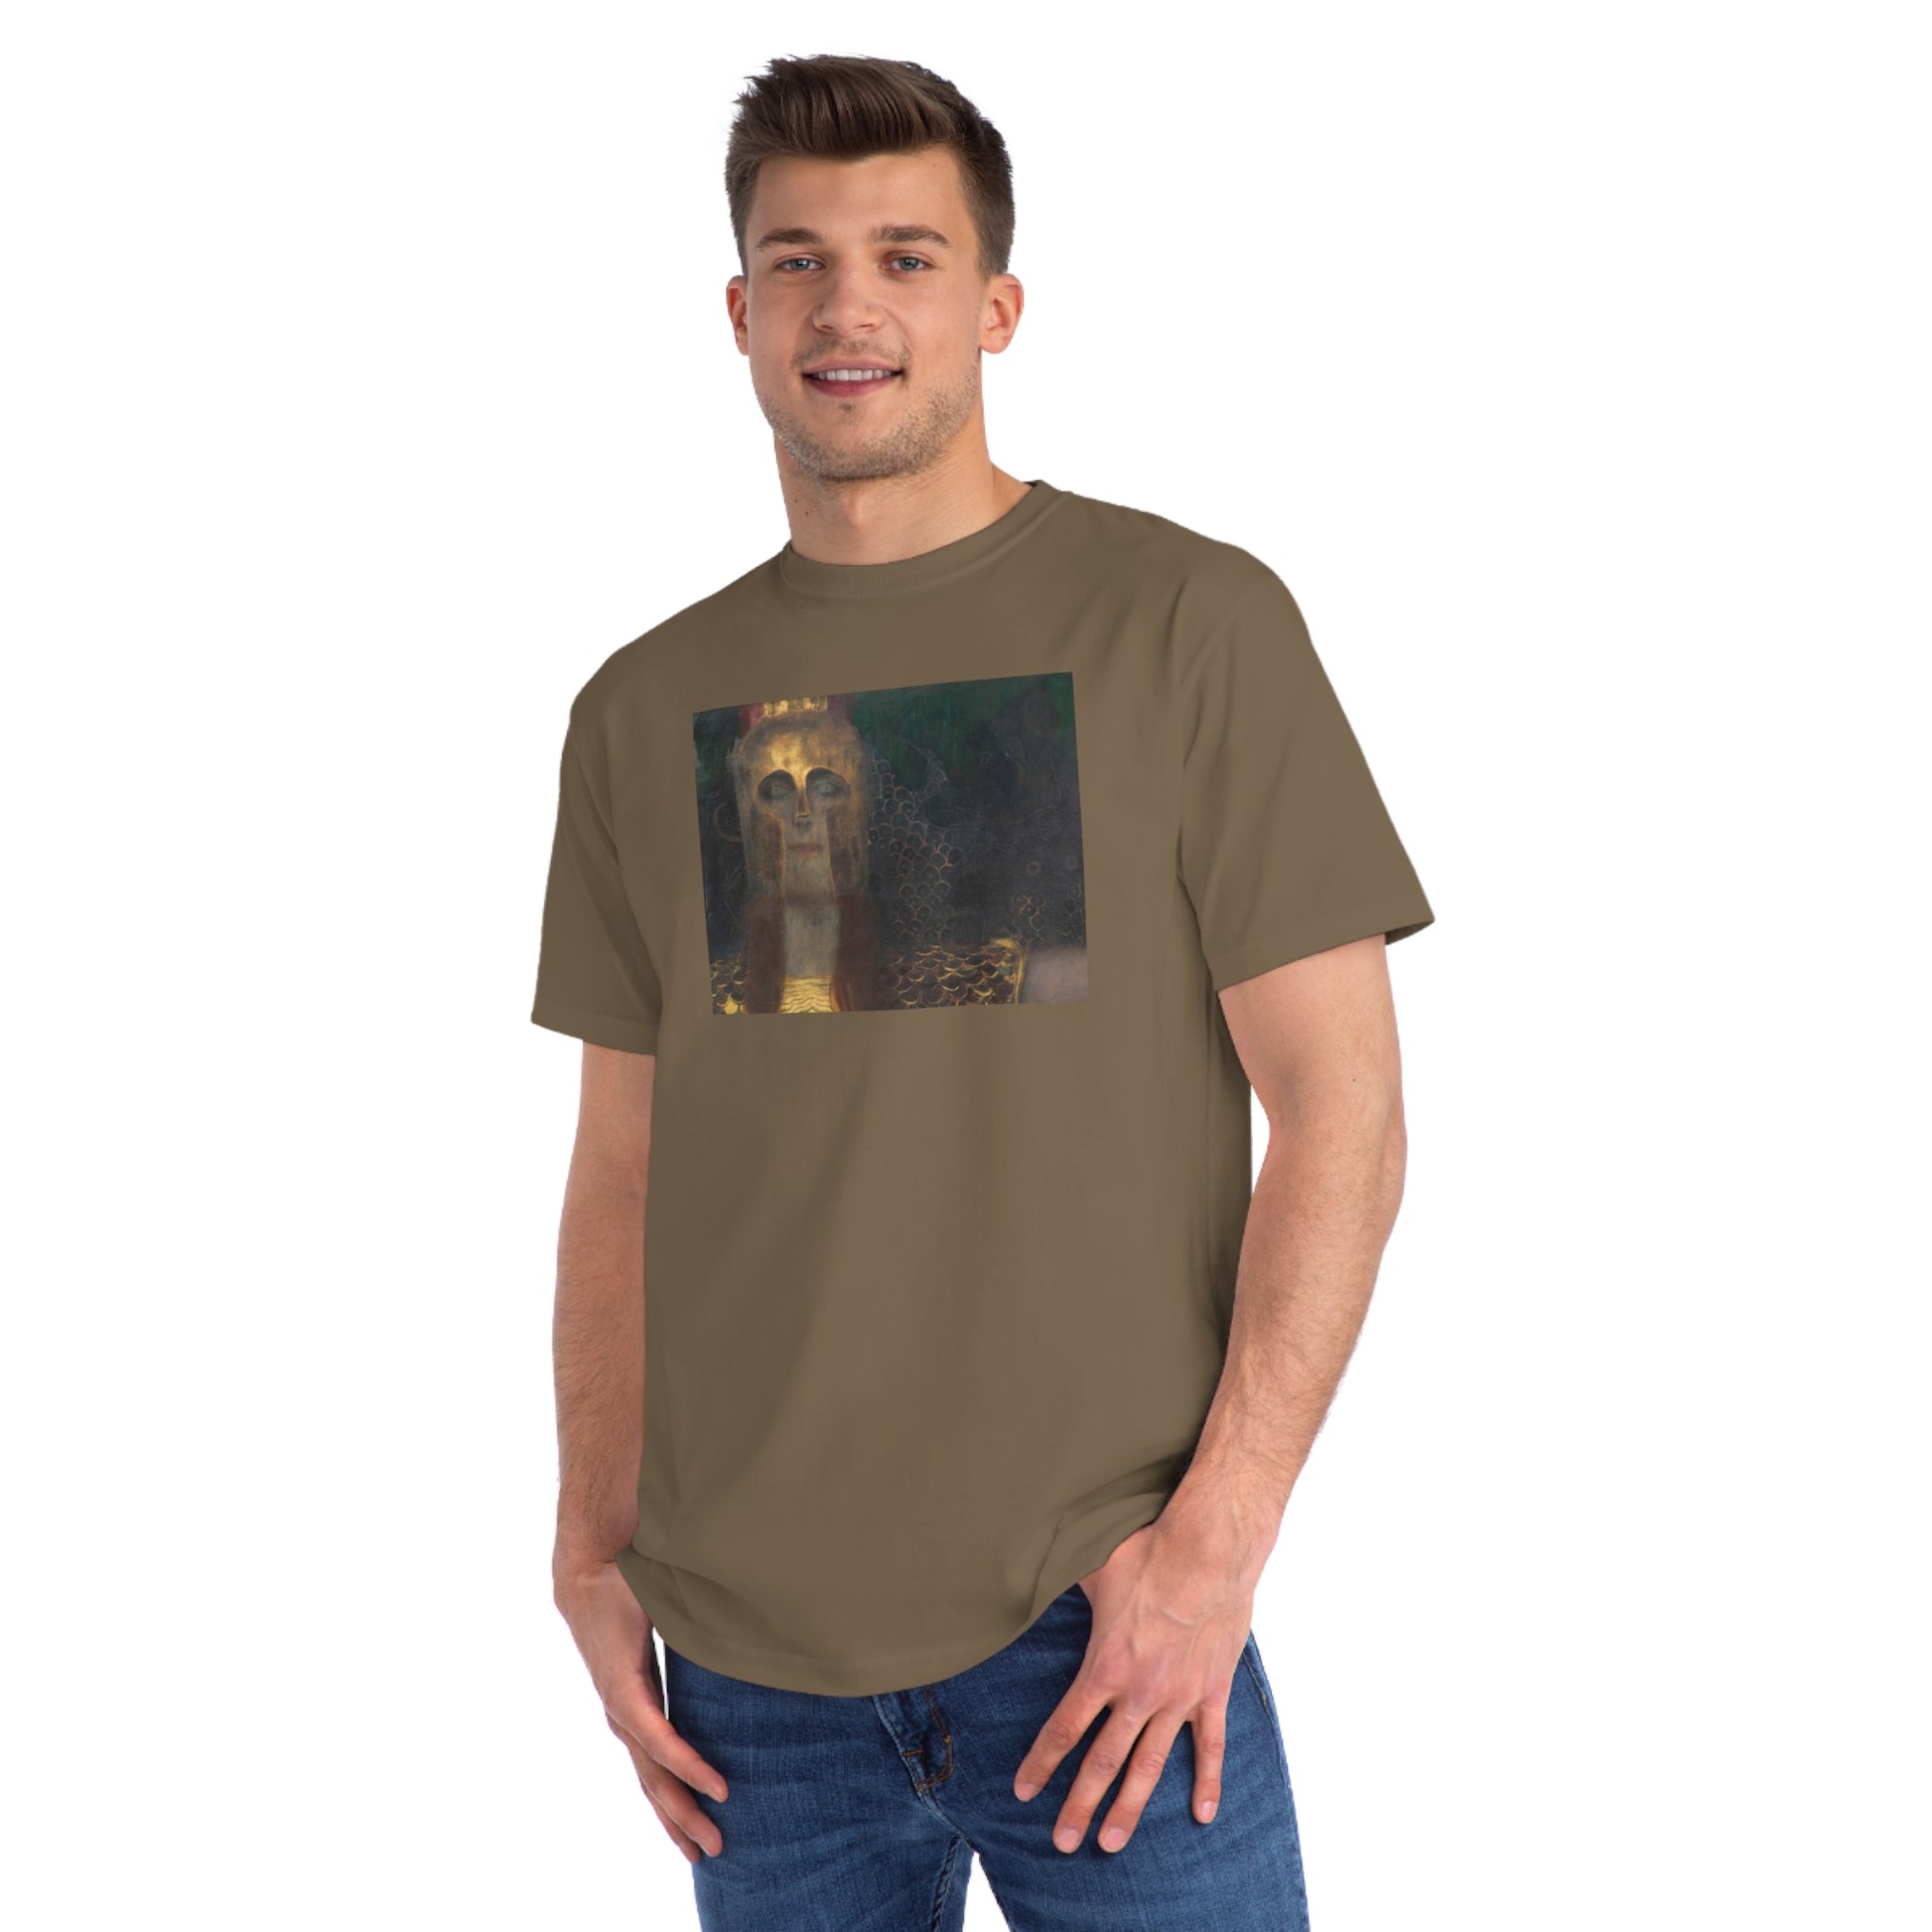 a man wearing a t - shirt with a picture of a dog on it